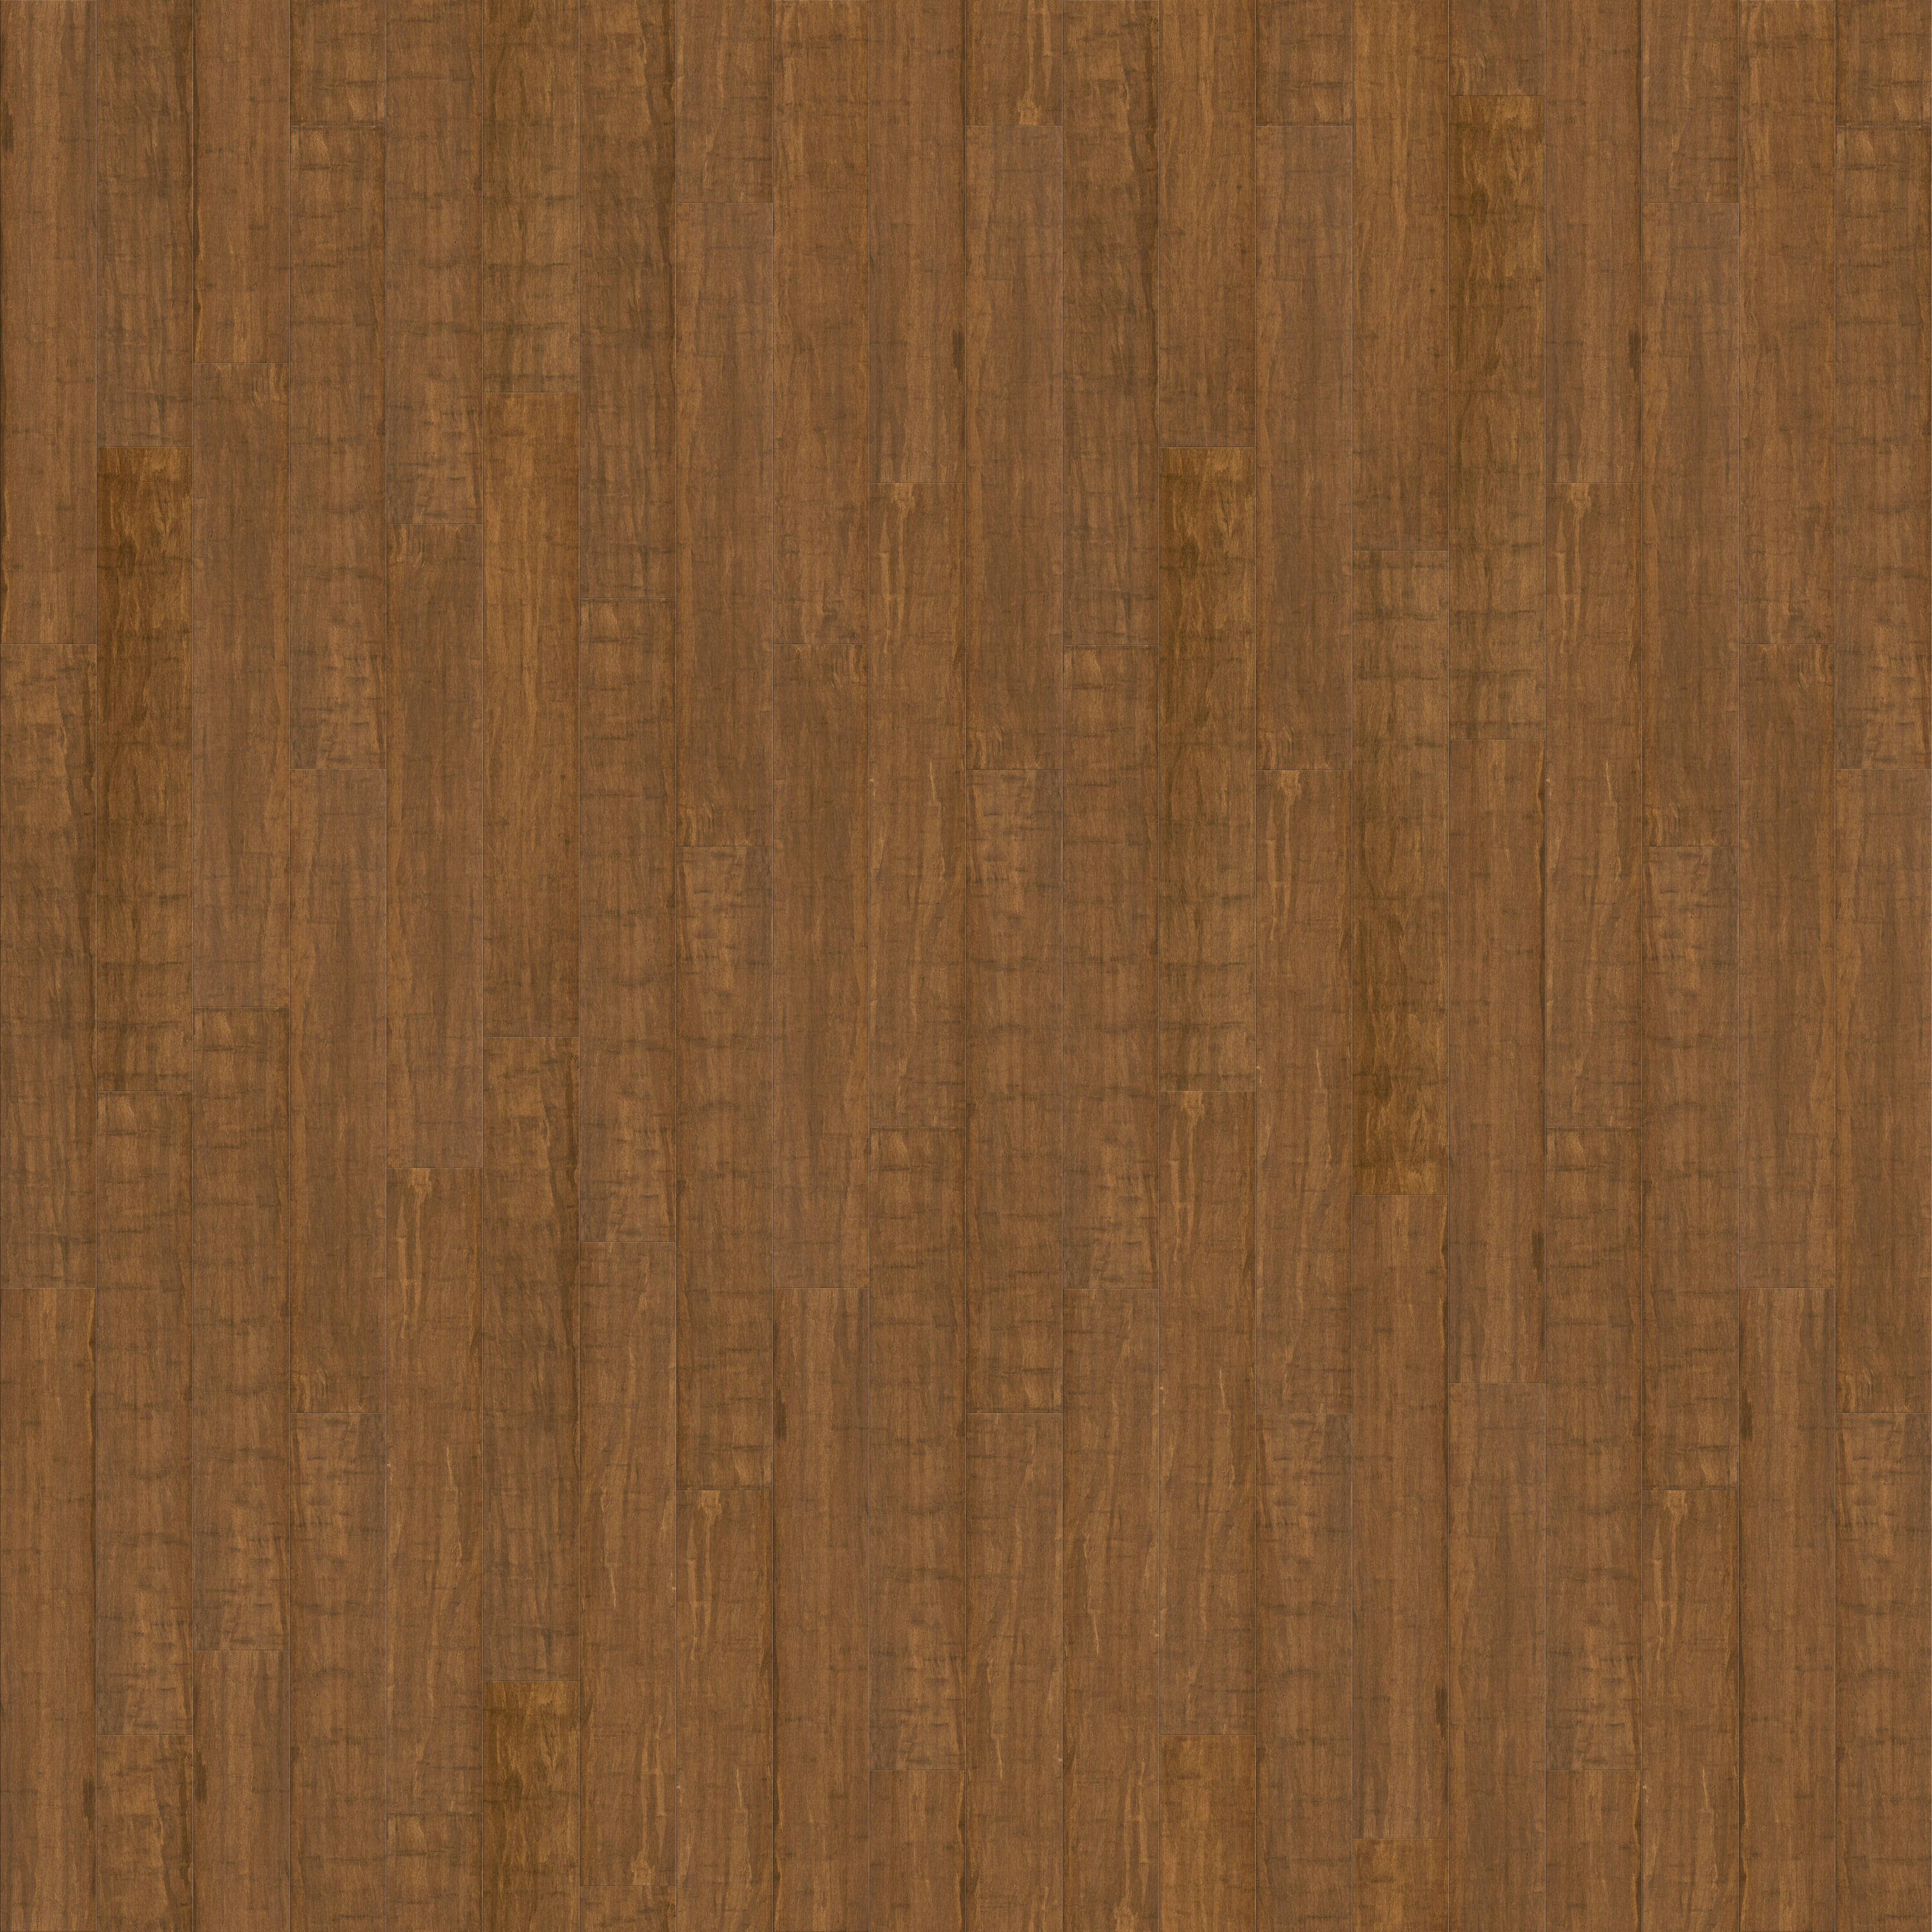 Bamboo Plywood - 3/4 in Unfinished Java Vertical